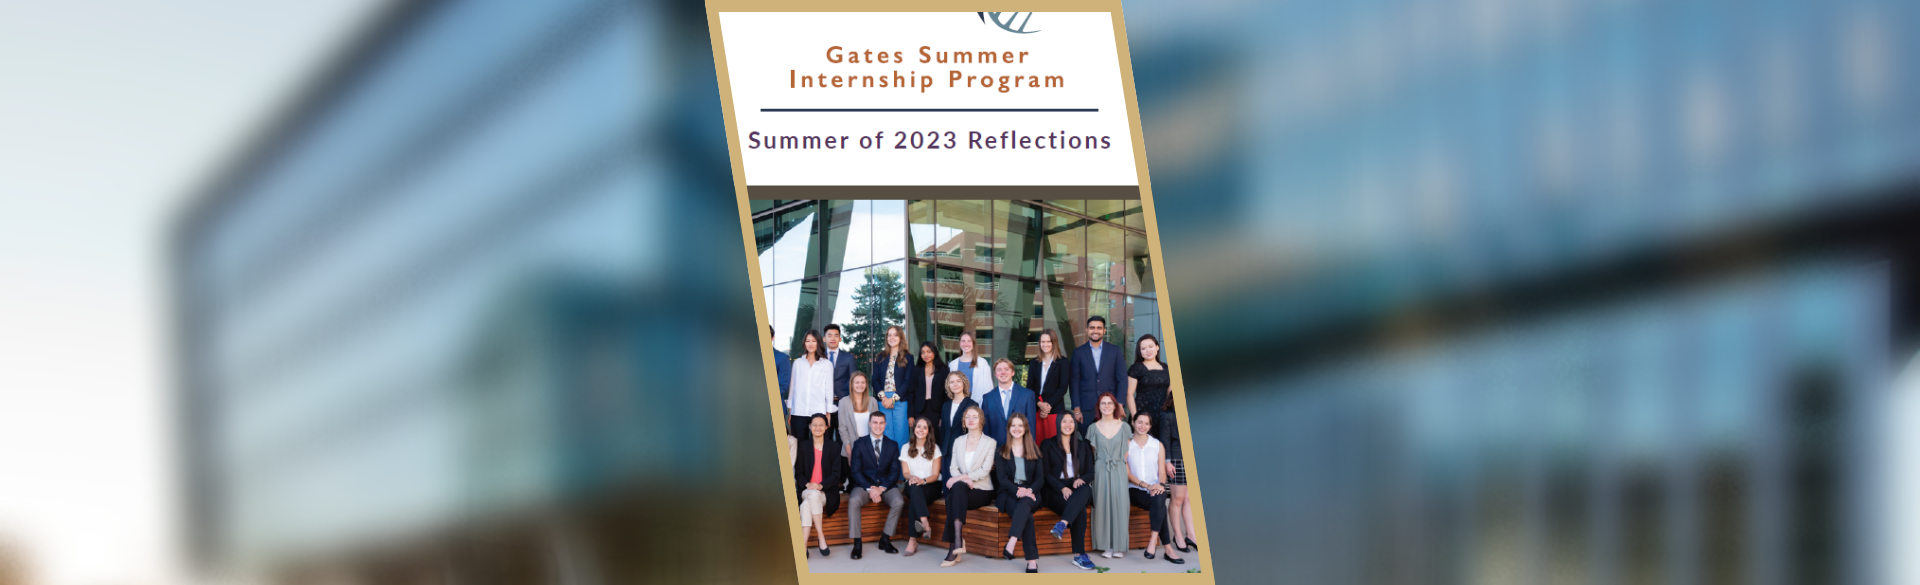 Thank you booklet compiles the reflections of Gates Summer interns.